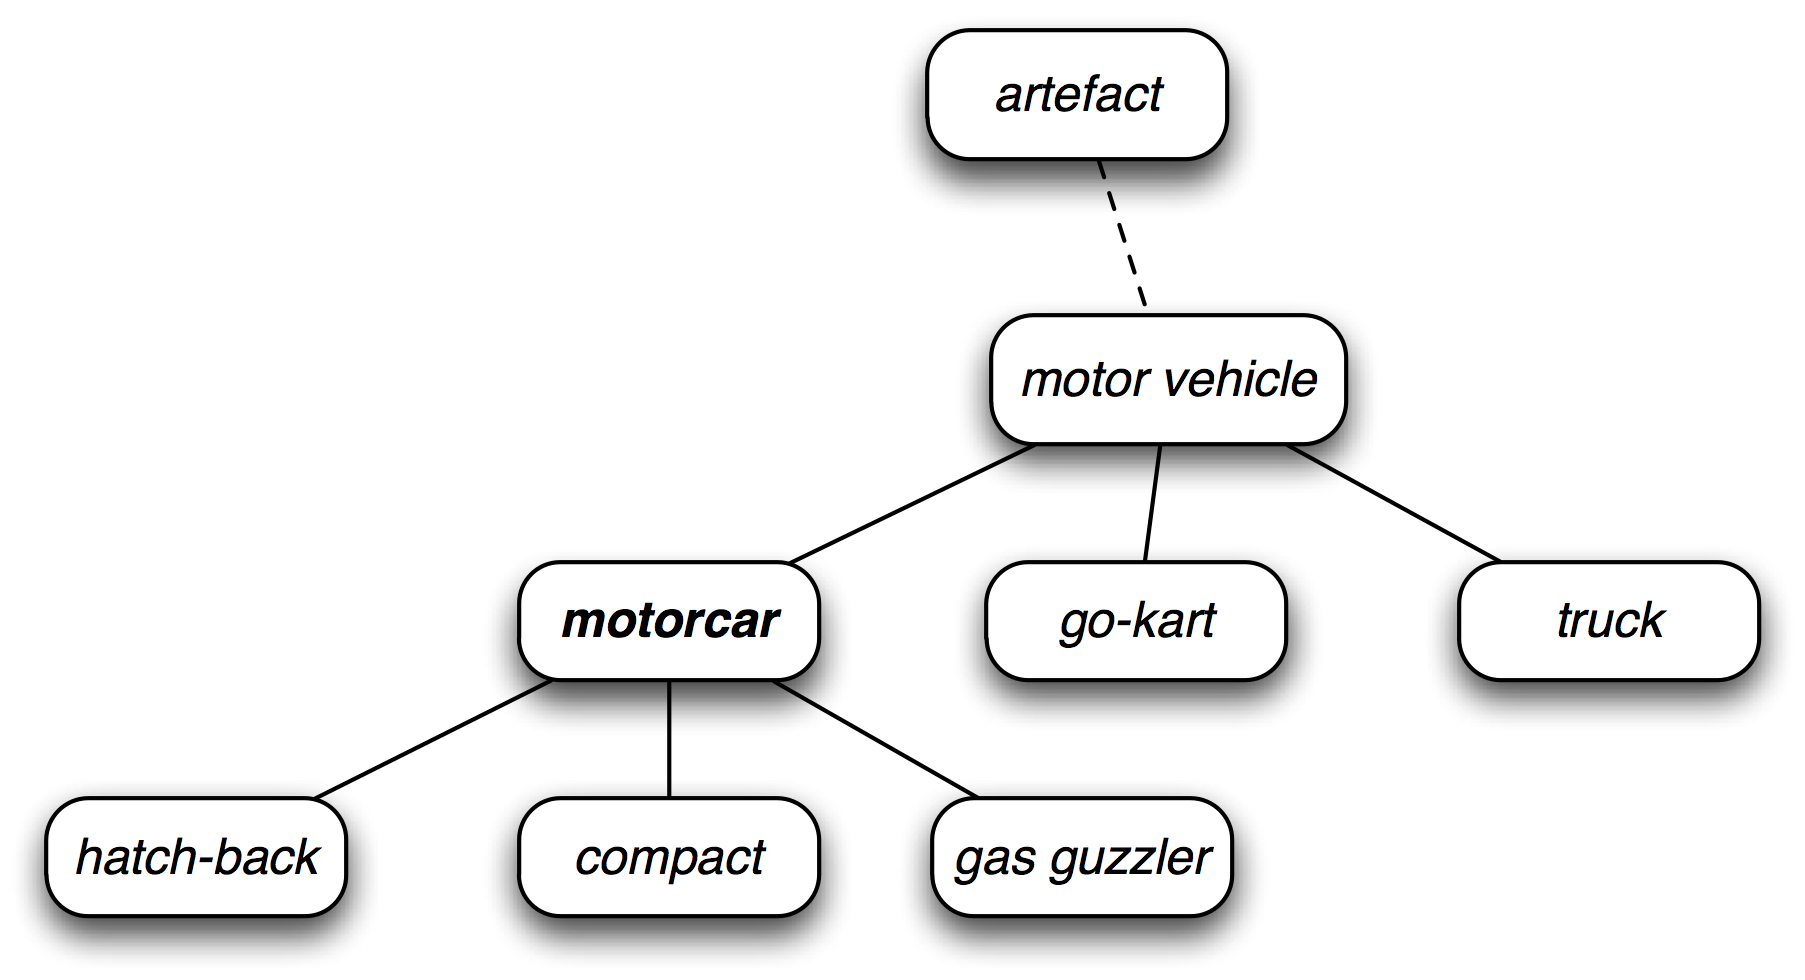 ../images/wordnet-hierarchy.png